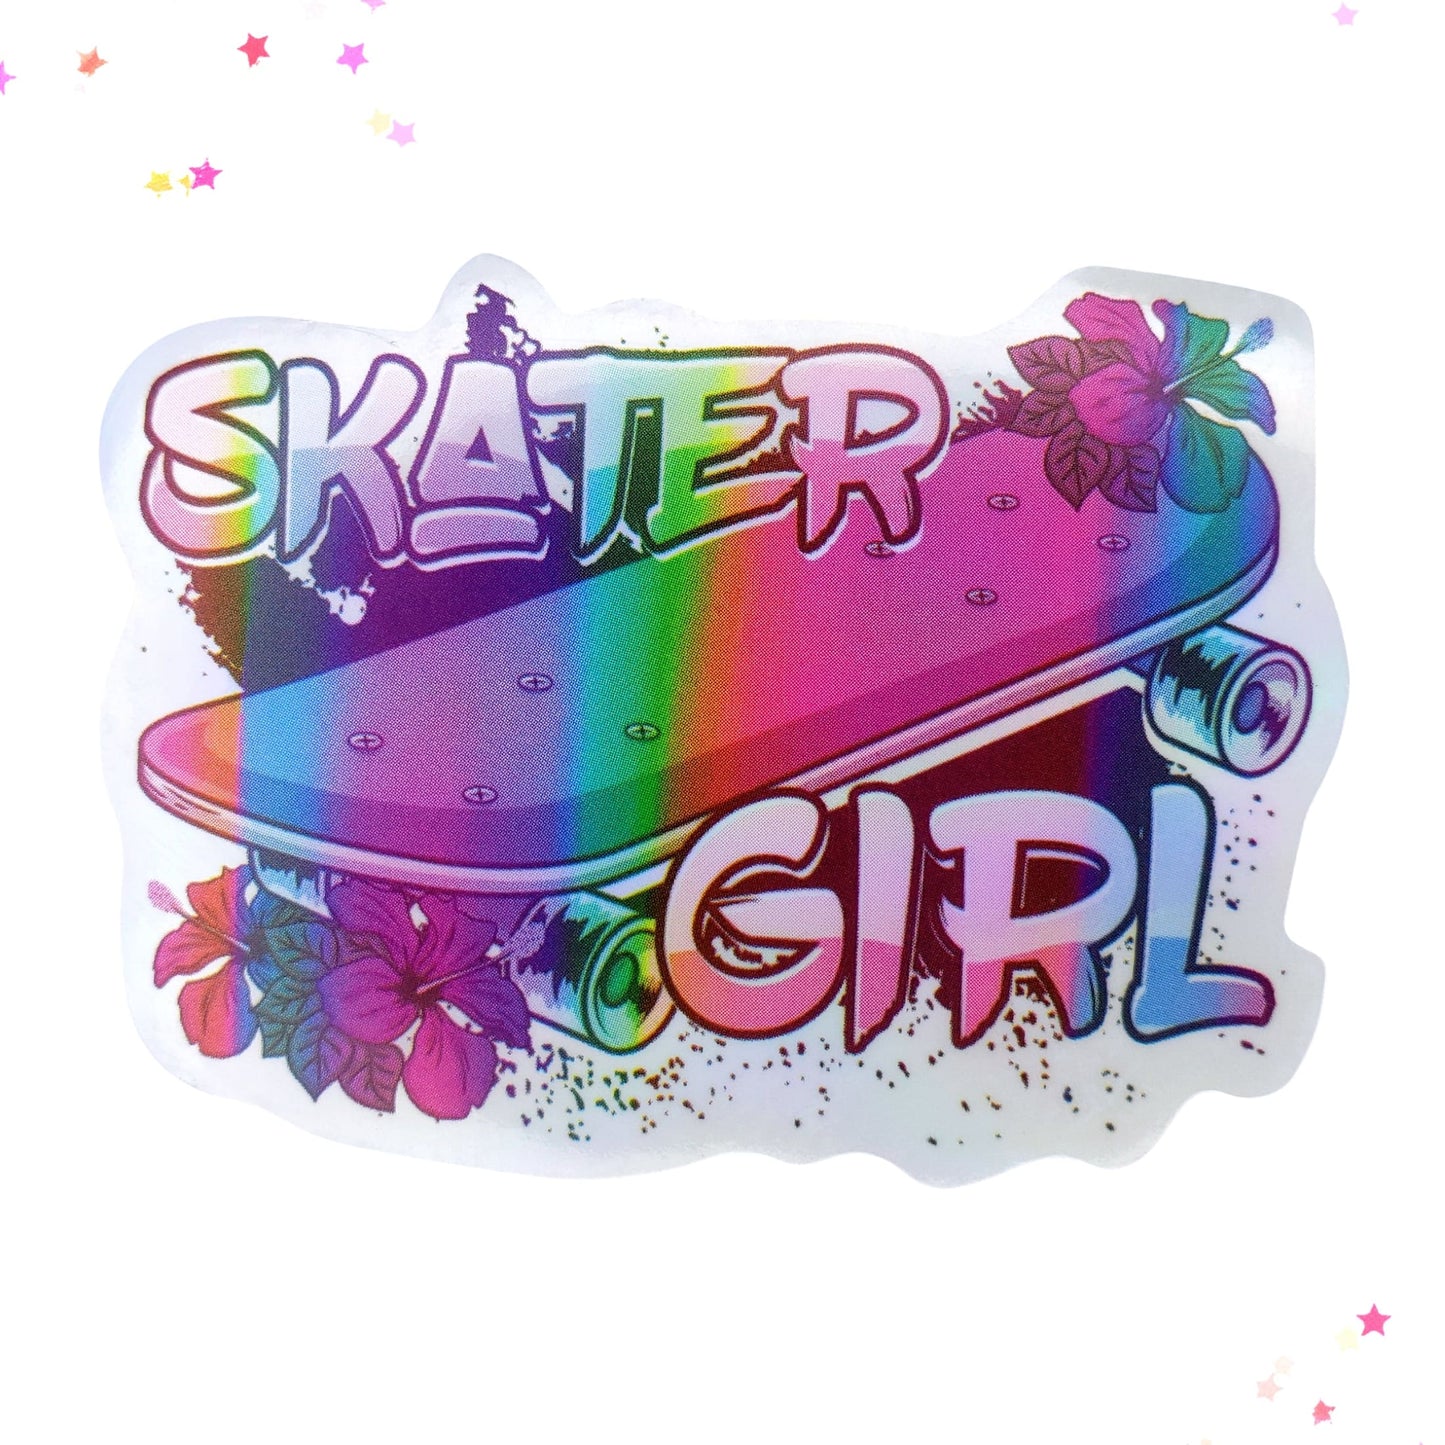 Skater Girl Skateboard Waterproof Holographic Sticker from Confetti Kitty, Only 1.0